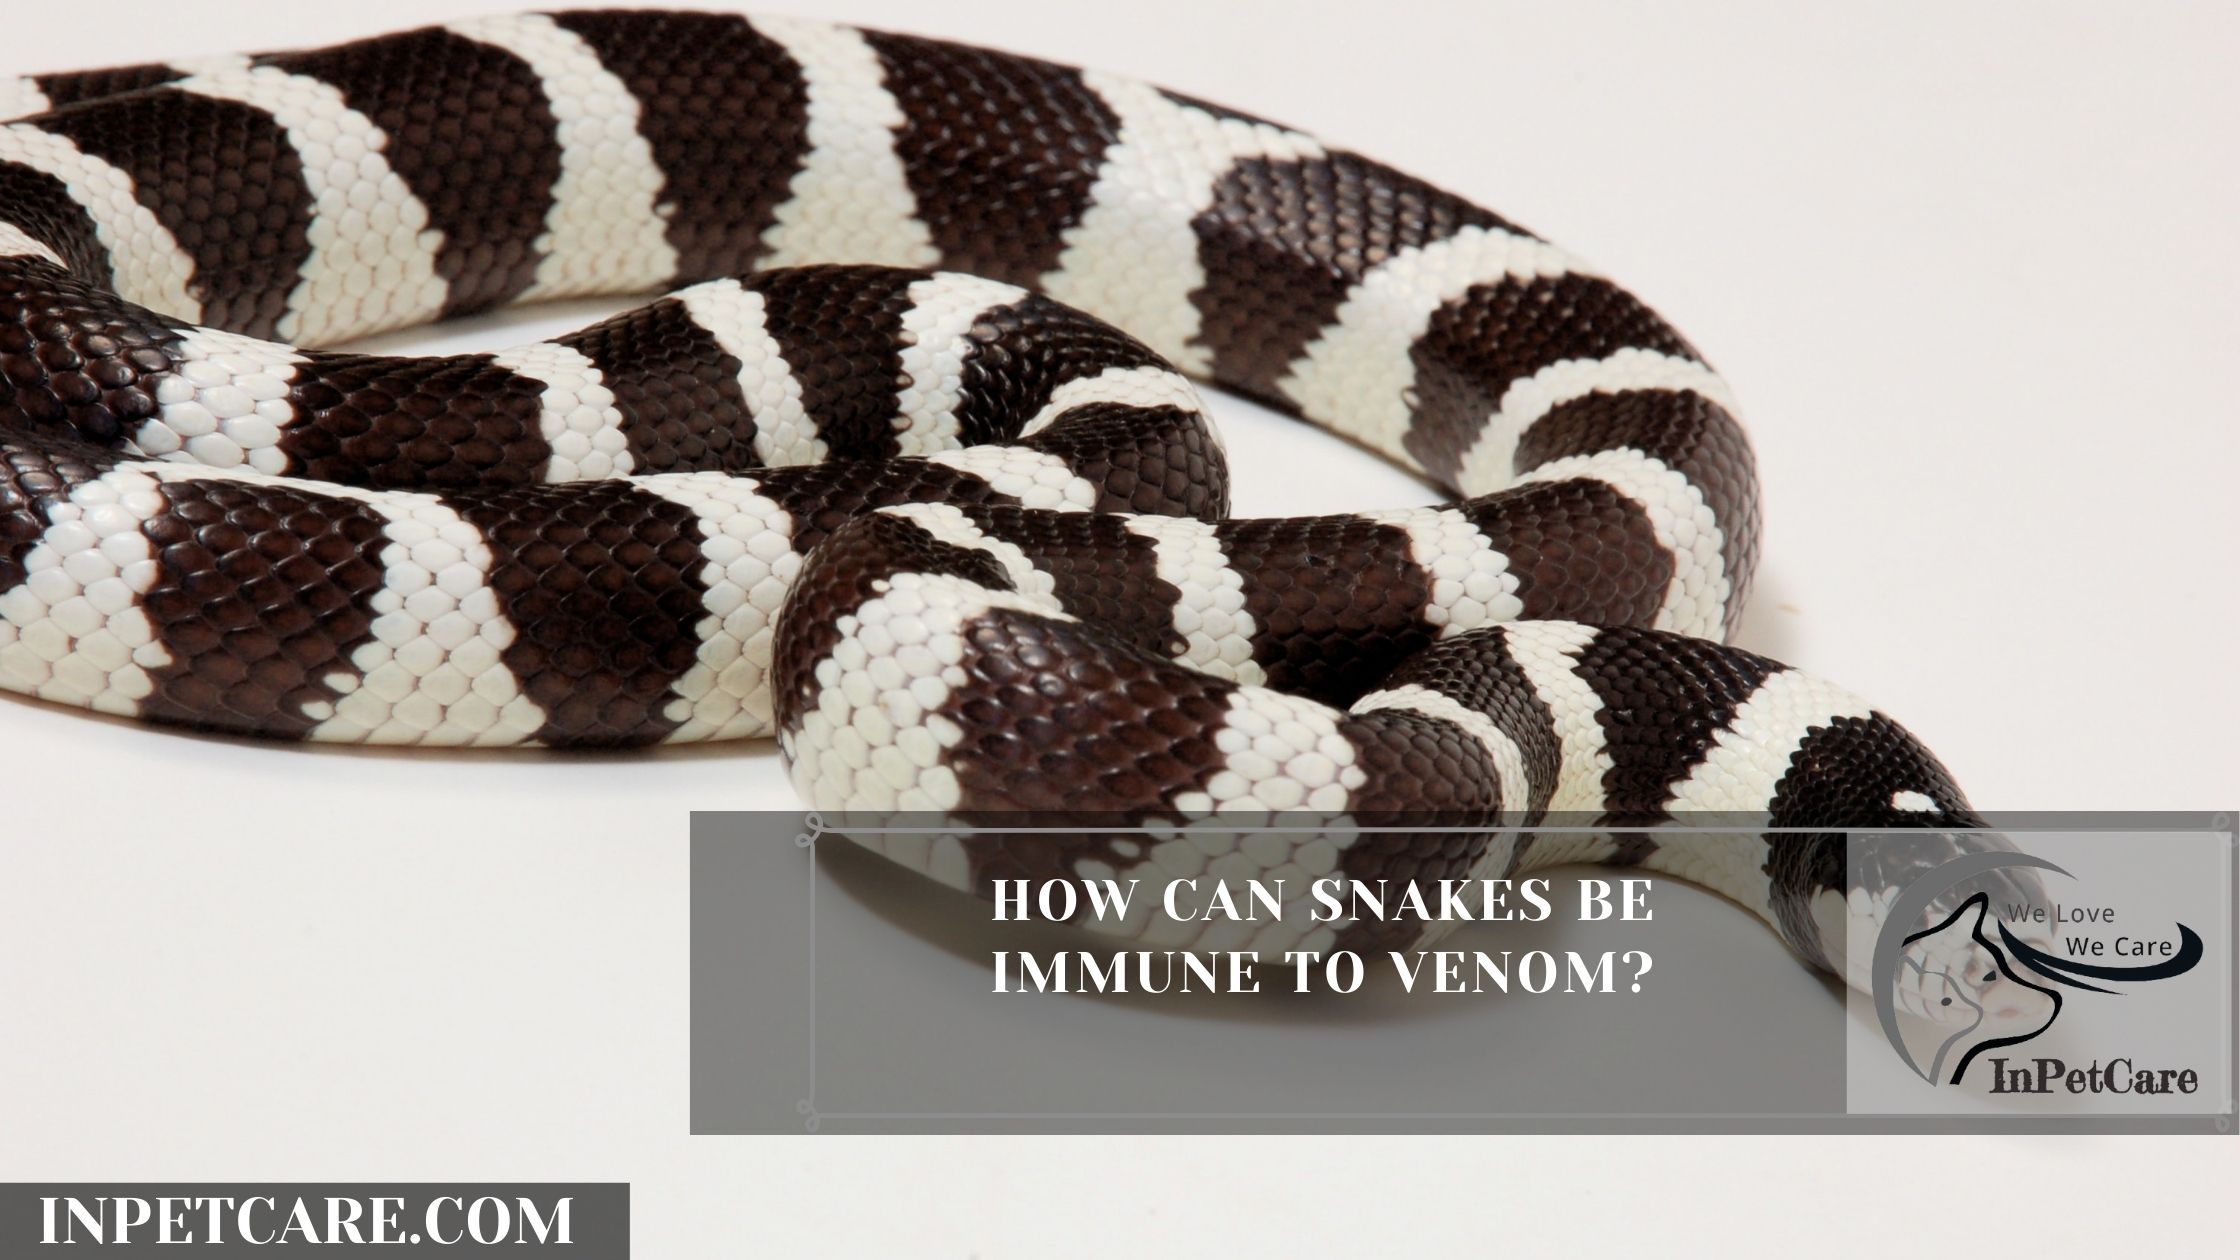 How Can Snakes Be Immune To Venom?